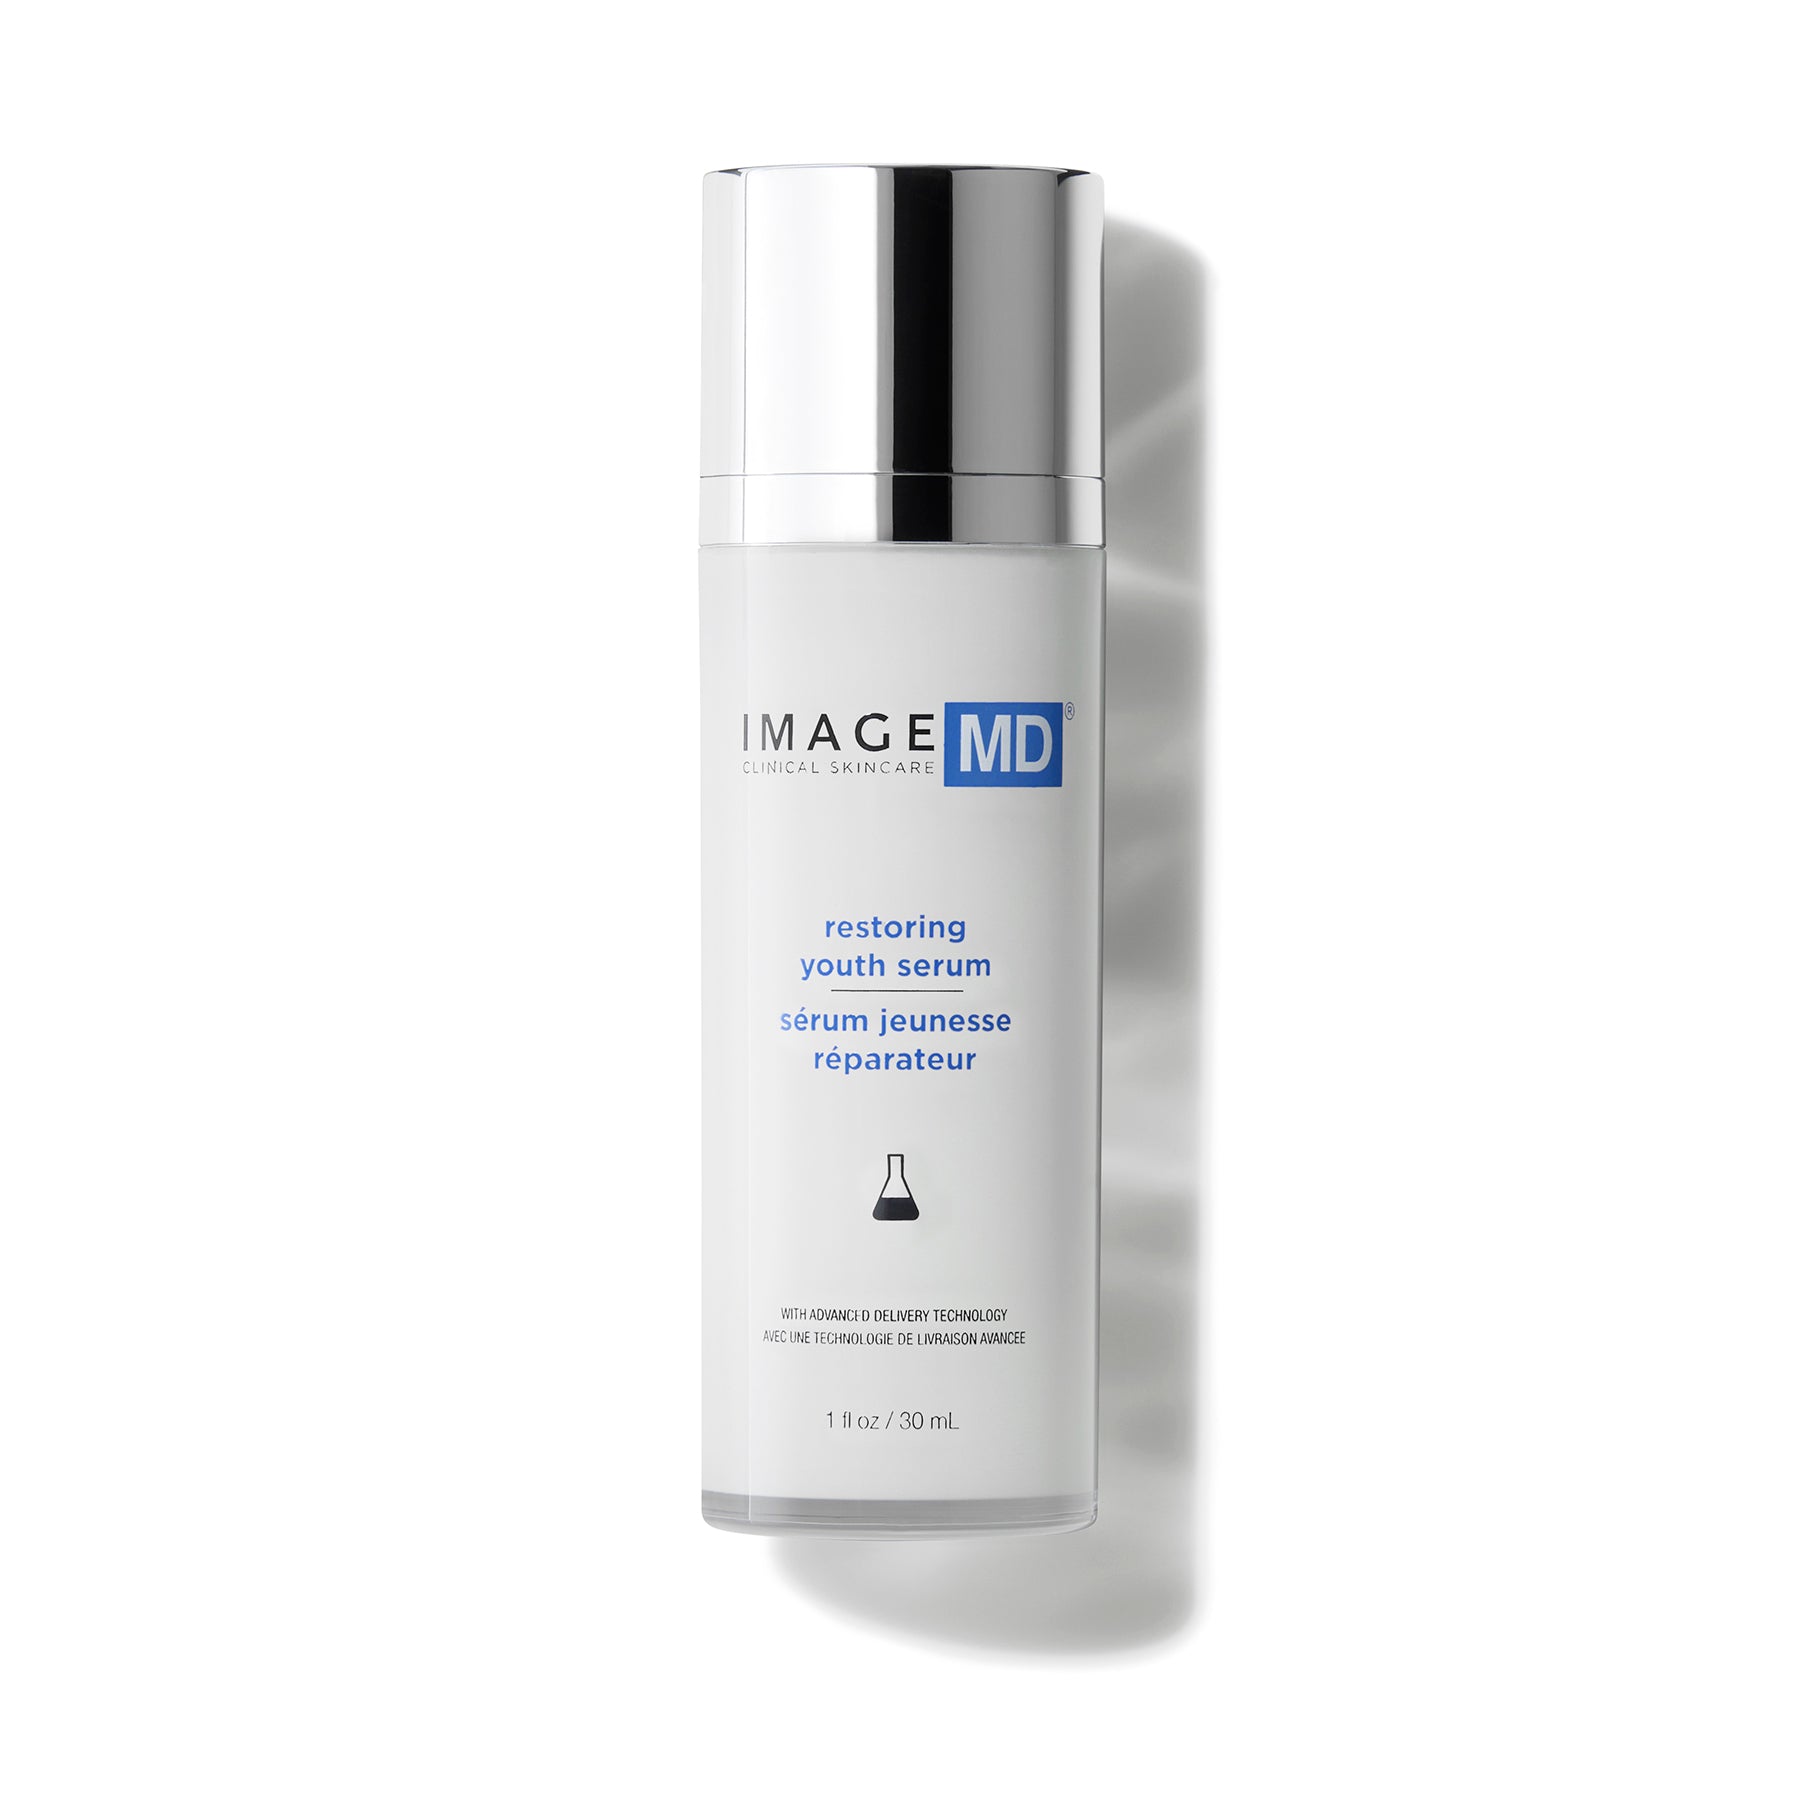 Image MD Restoring Youth Serum At Exclusive Beauty